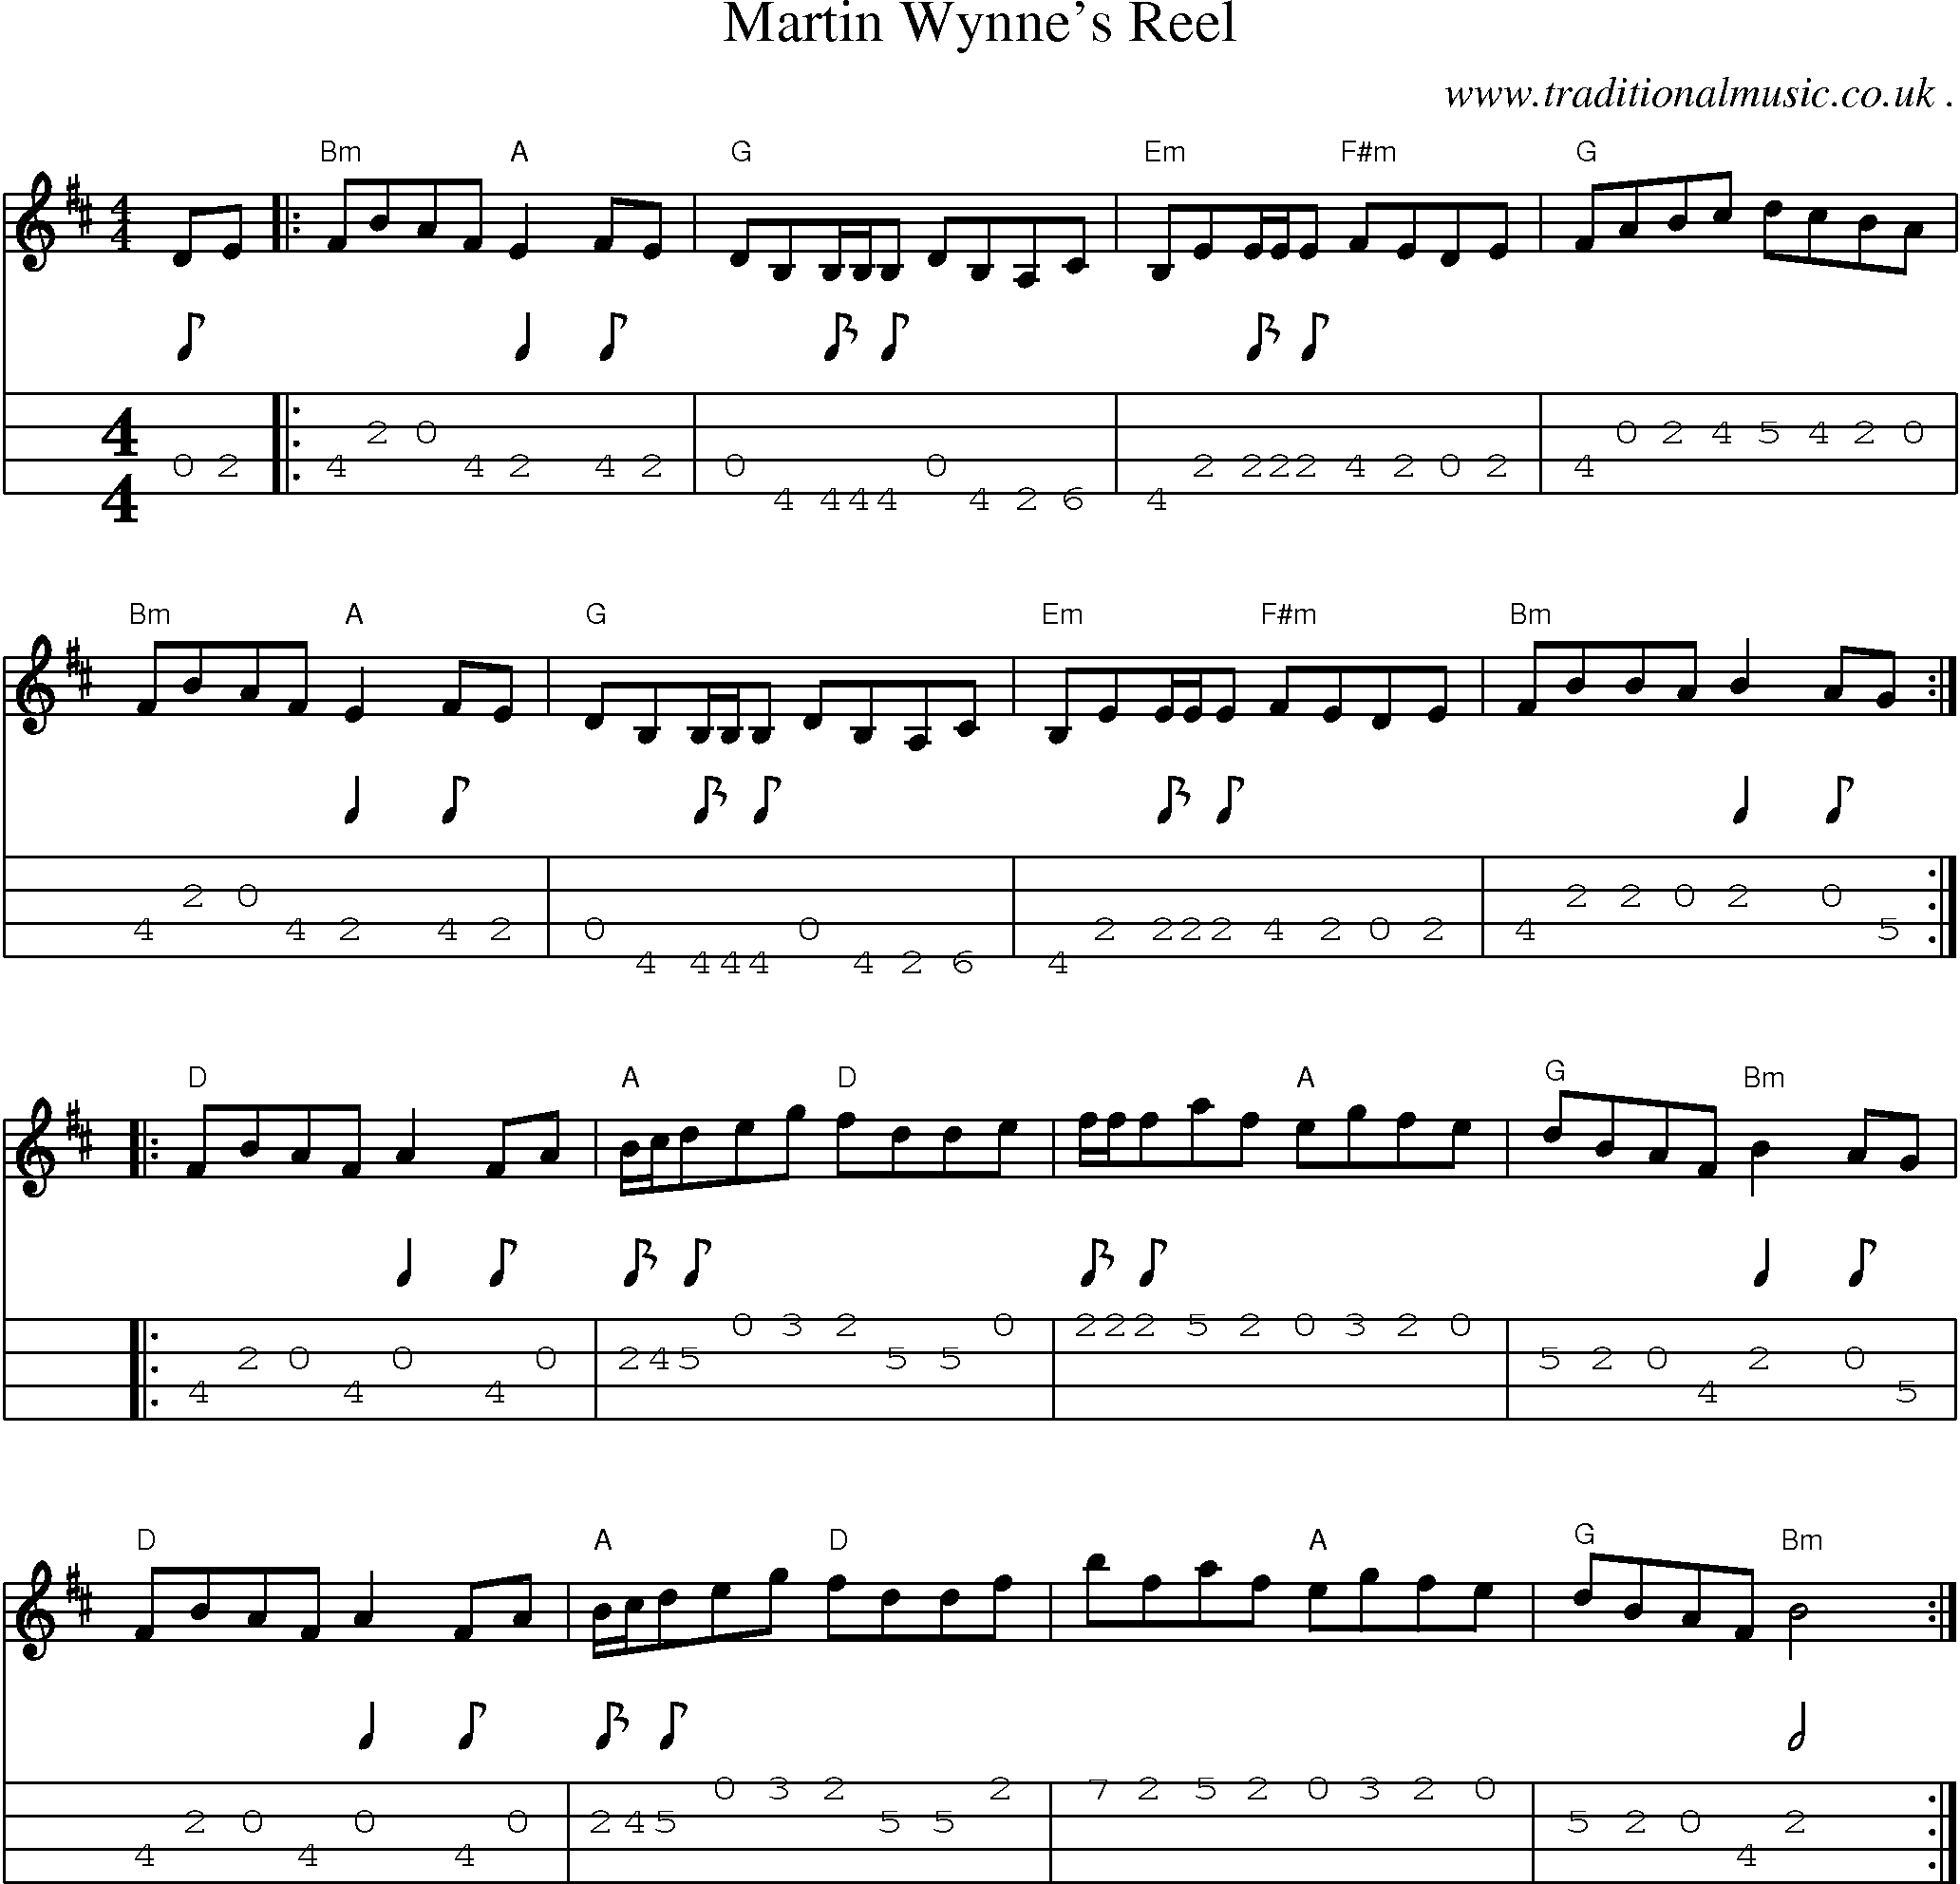 Music Score and Guitar Tabs for Martin Wynnes Reel